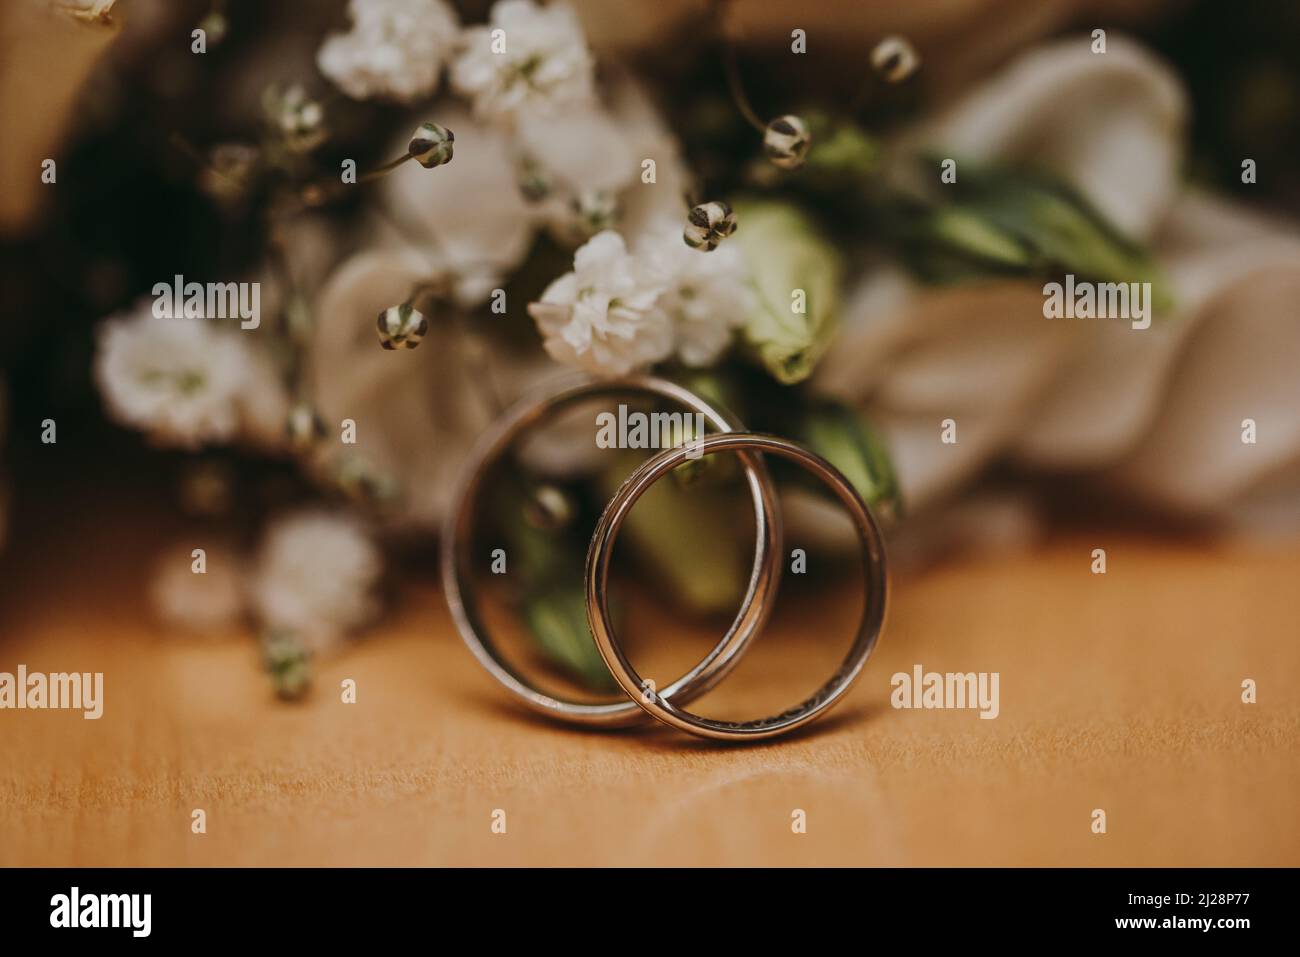 wedding rings with bouquet close up Stock Photo